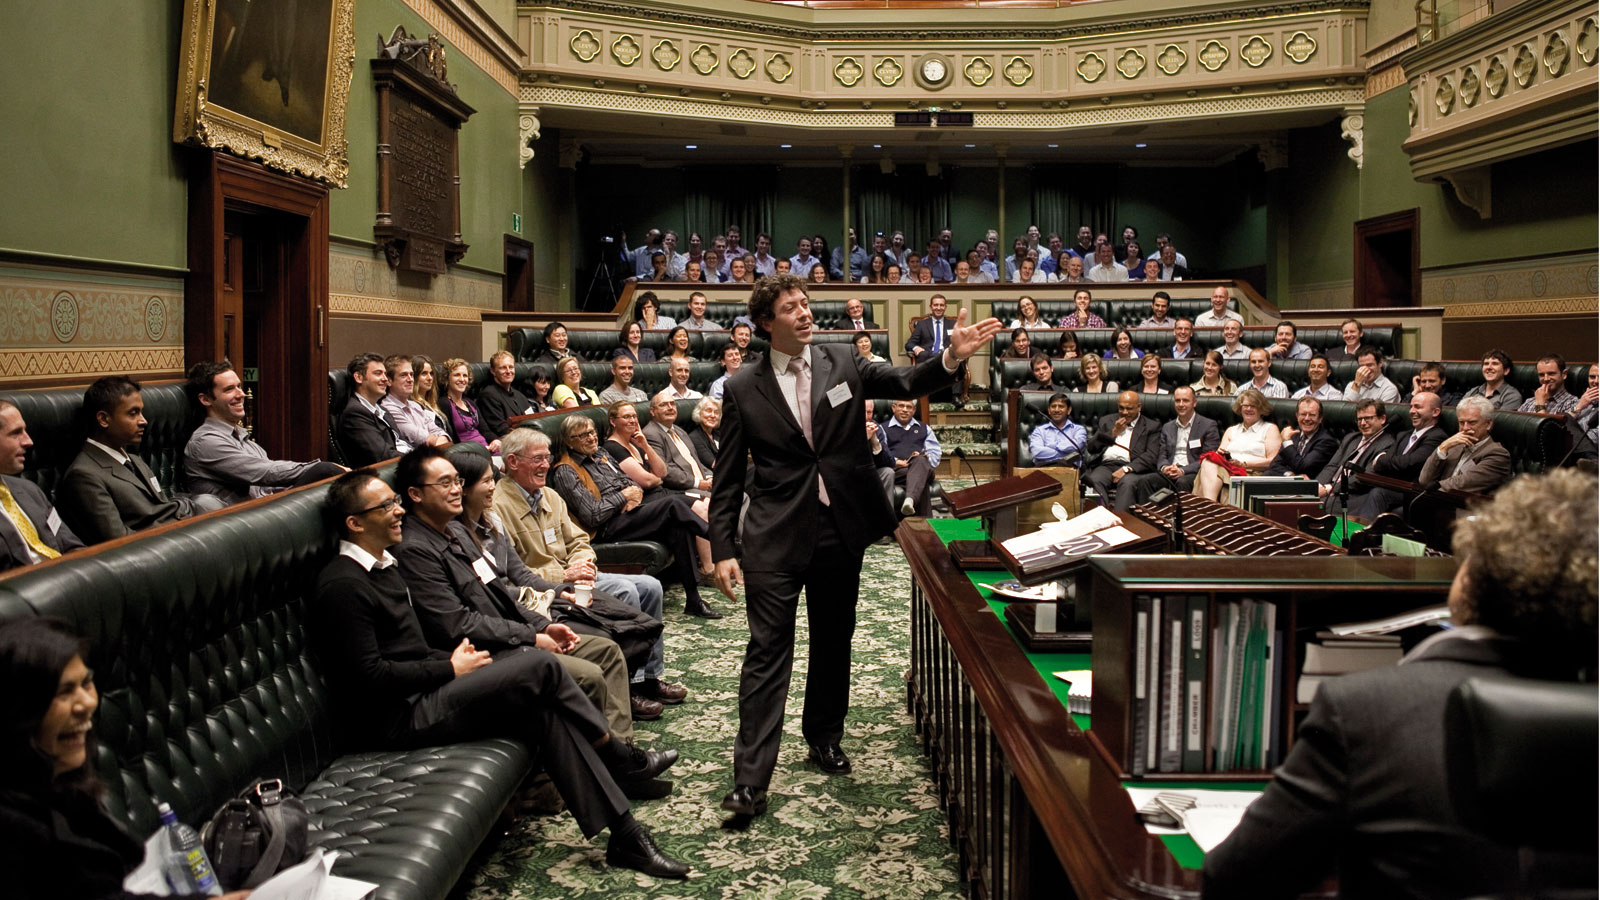 The 2011 Expressive Engineering Debating Series at NSW Parliament House